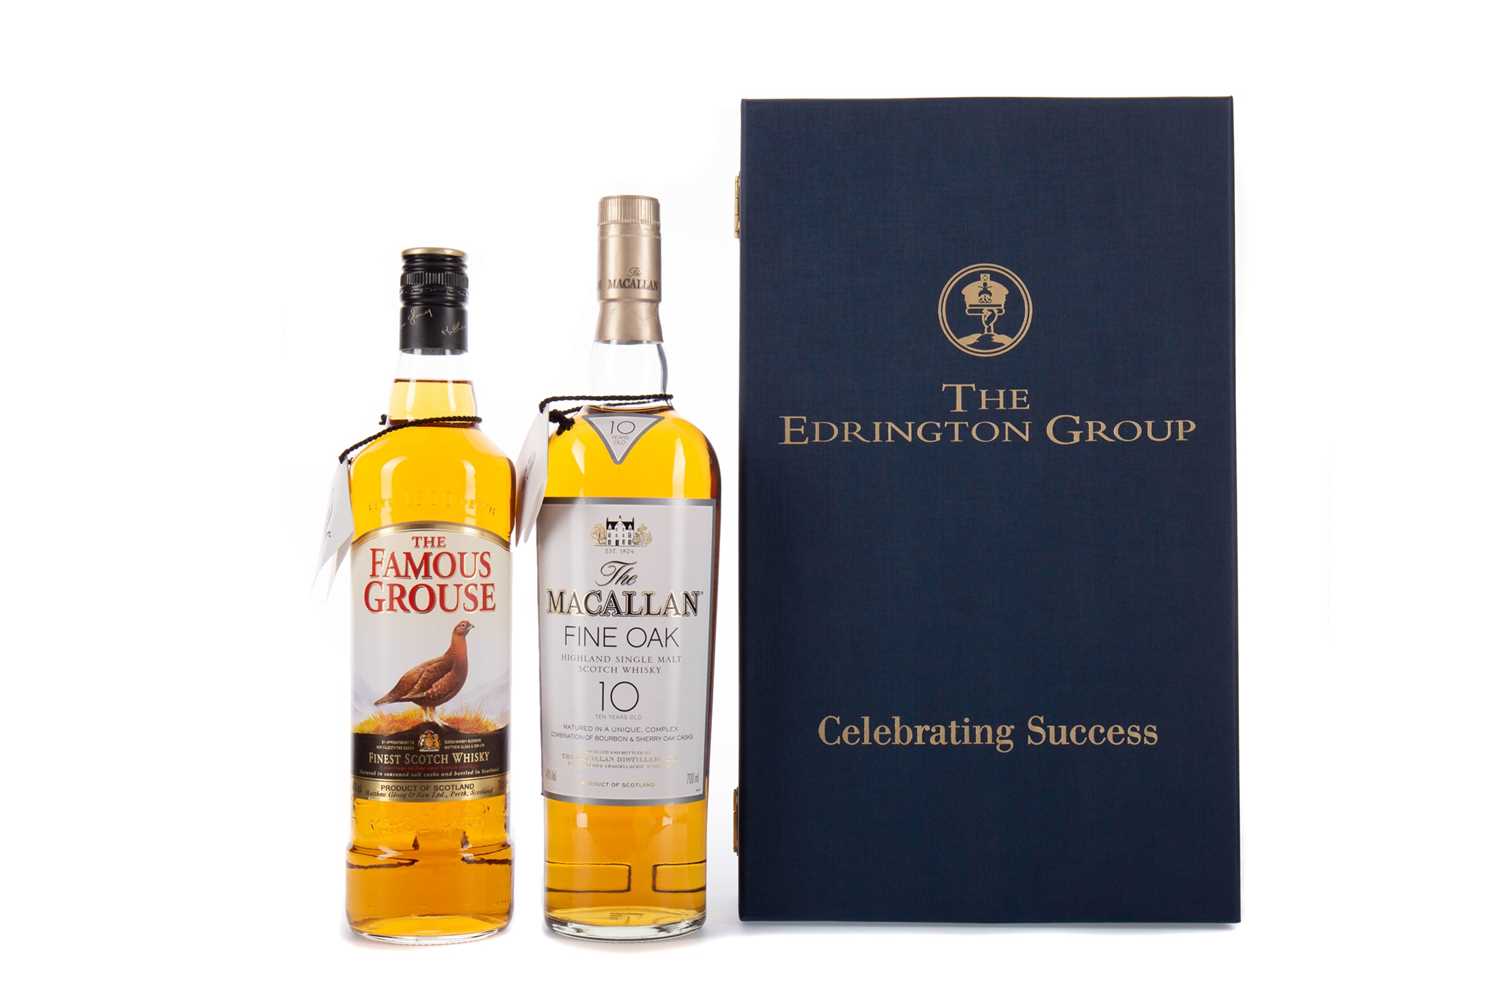 Lot 2 - MACALLAN FINE OAK 10 YEARS OLD AND FAMOUS GROUSE